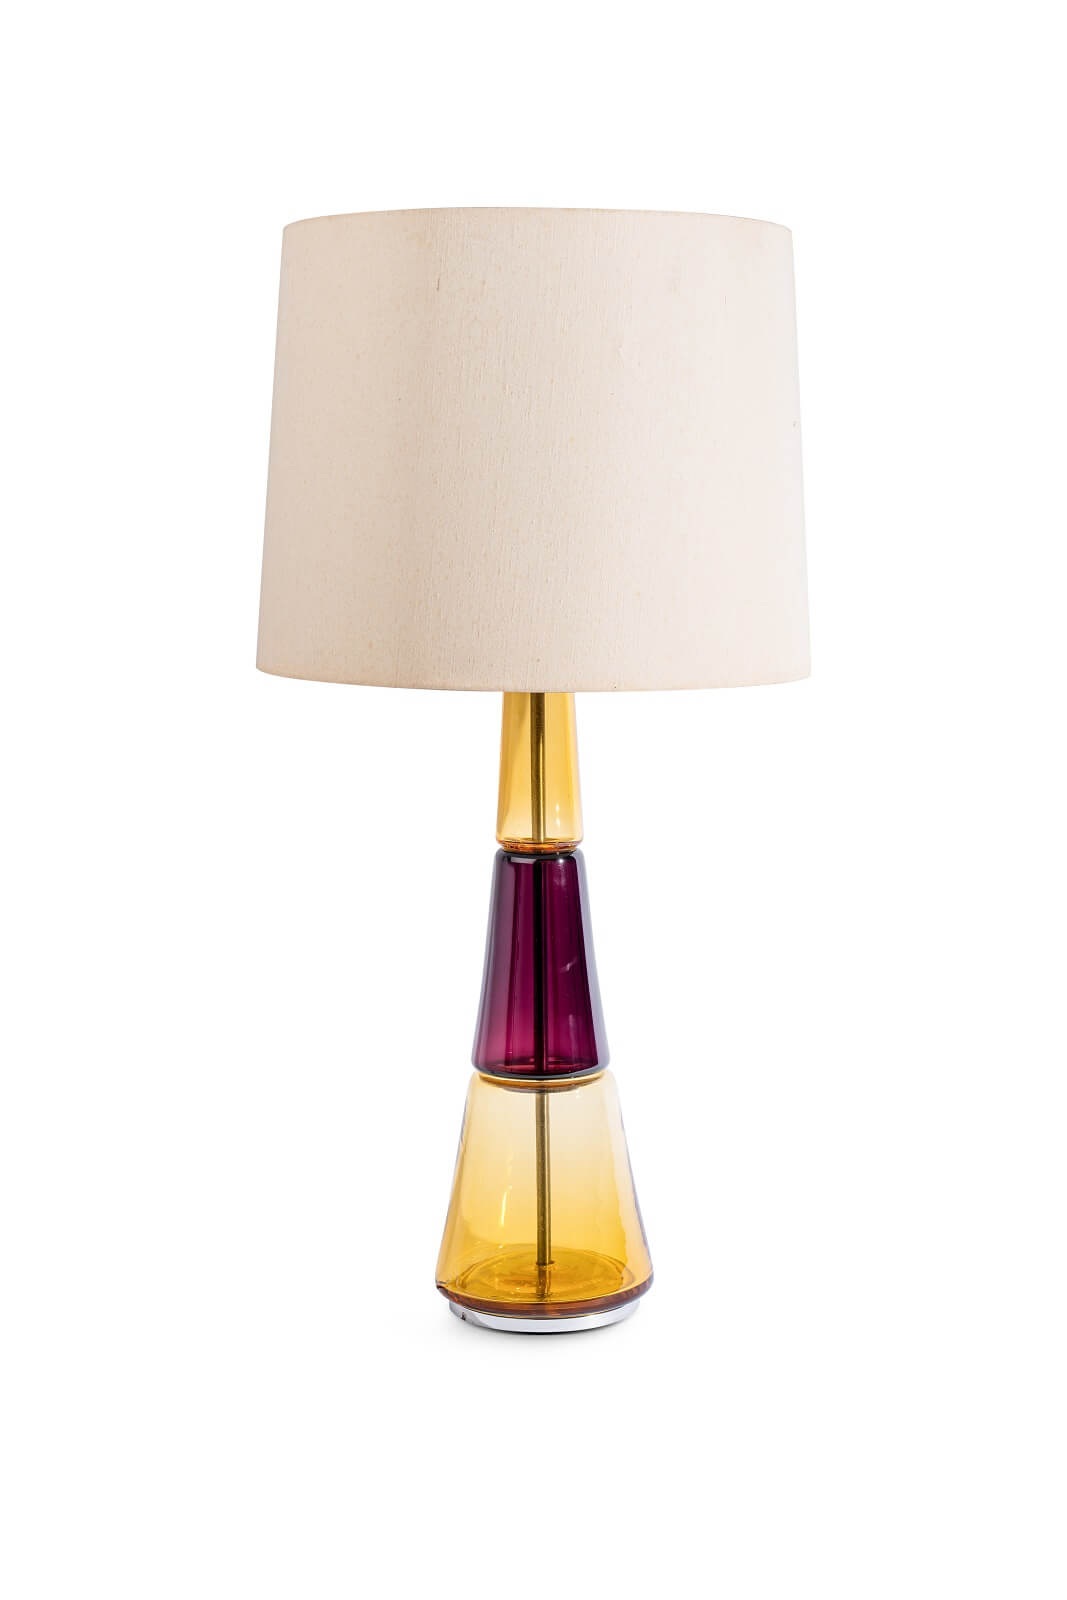 Table lamp by Fulvio Bianconi for sale